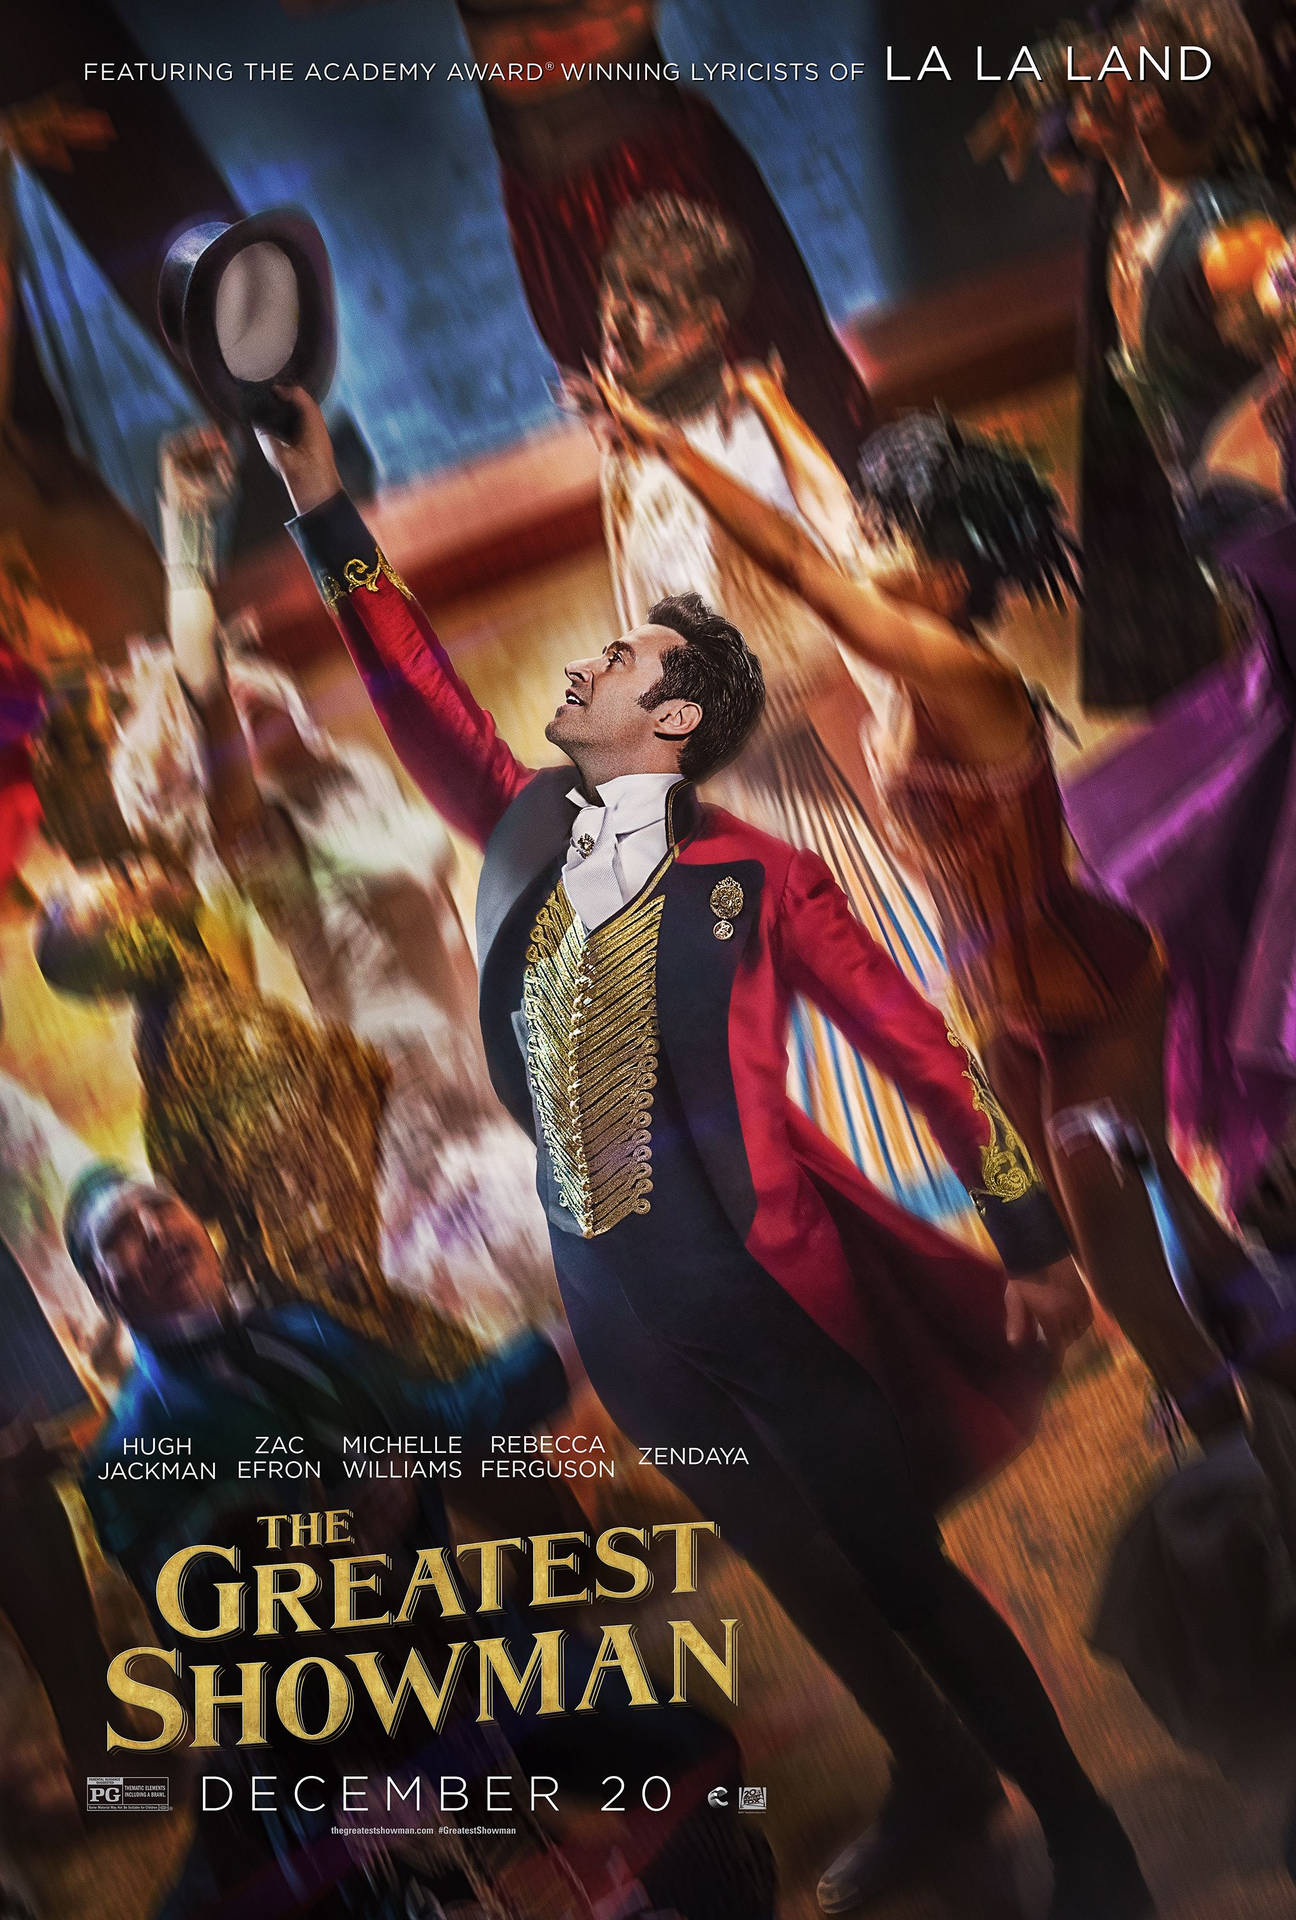 Painted Art Of The Greatest Showman Wallpaper